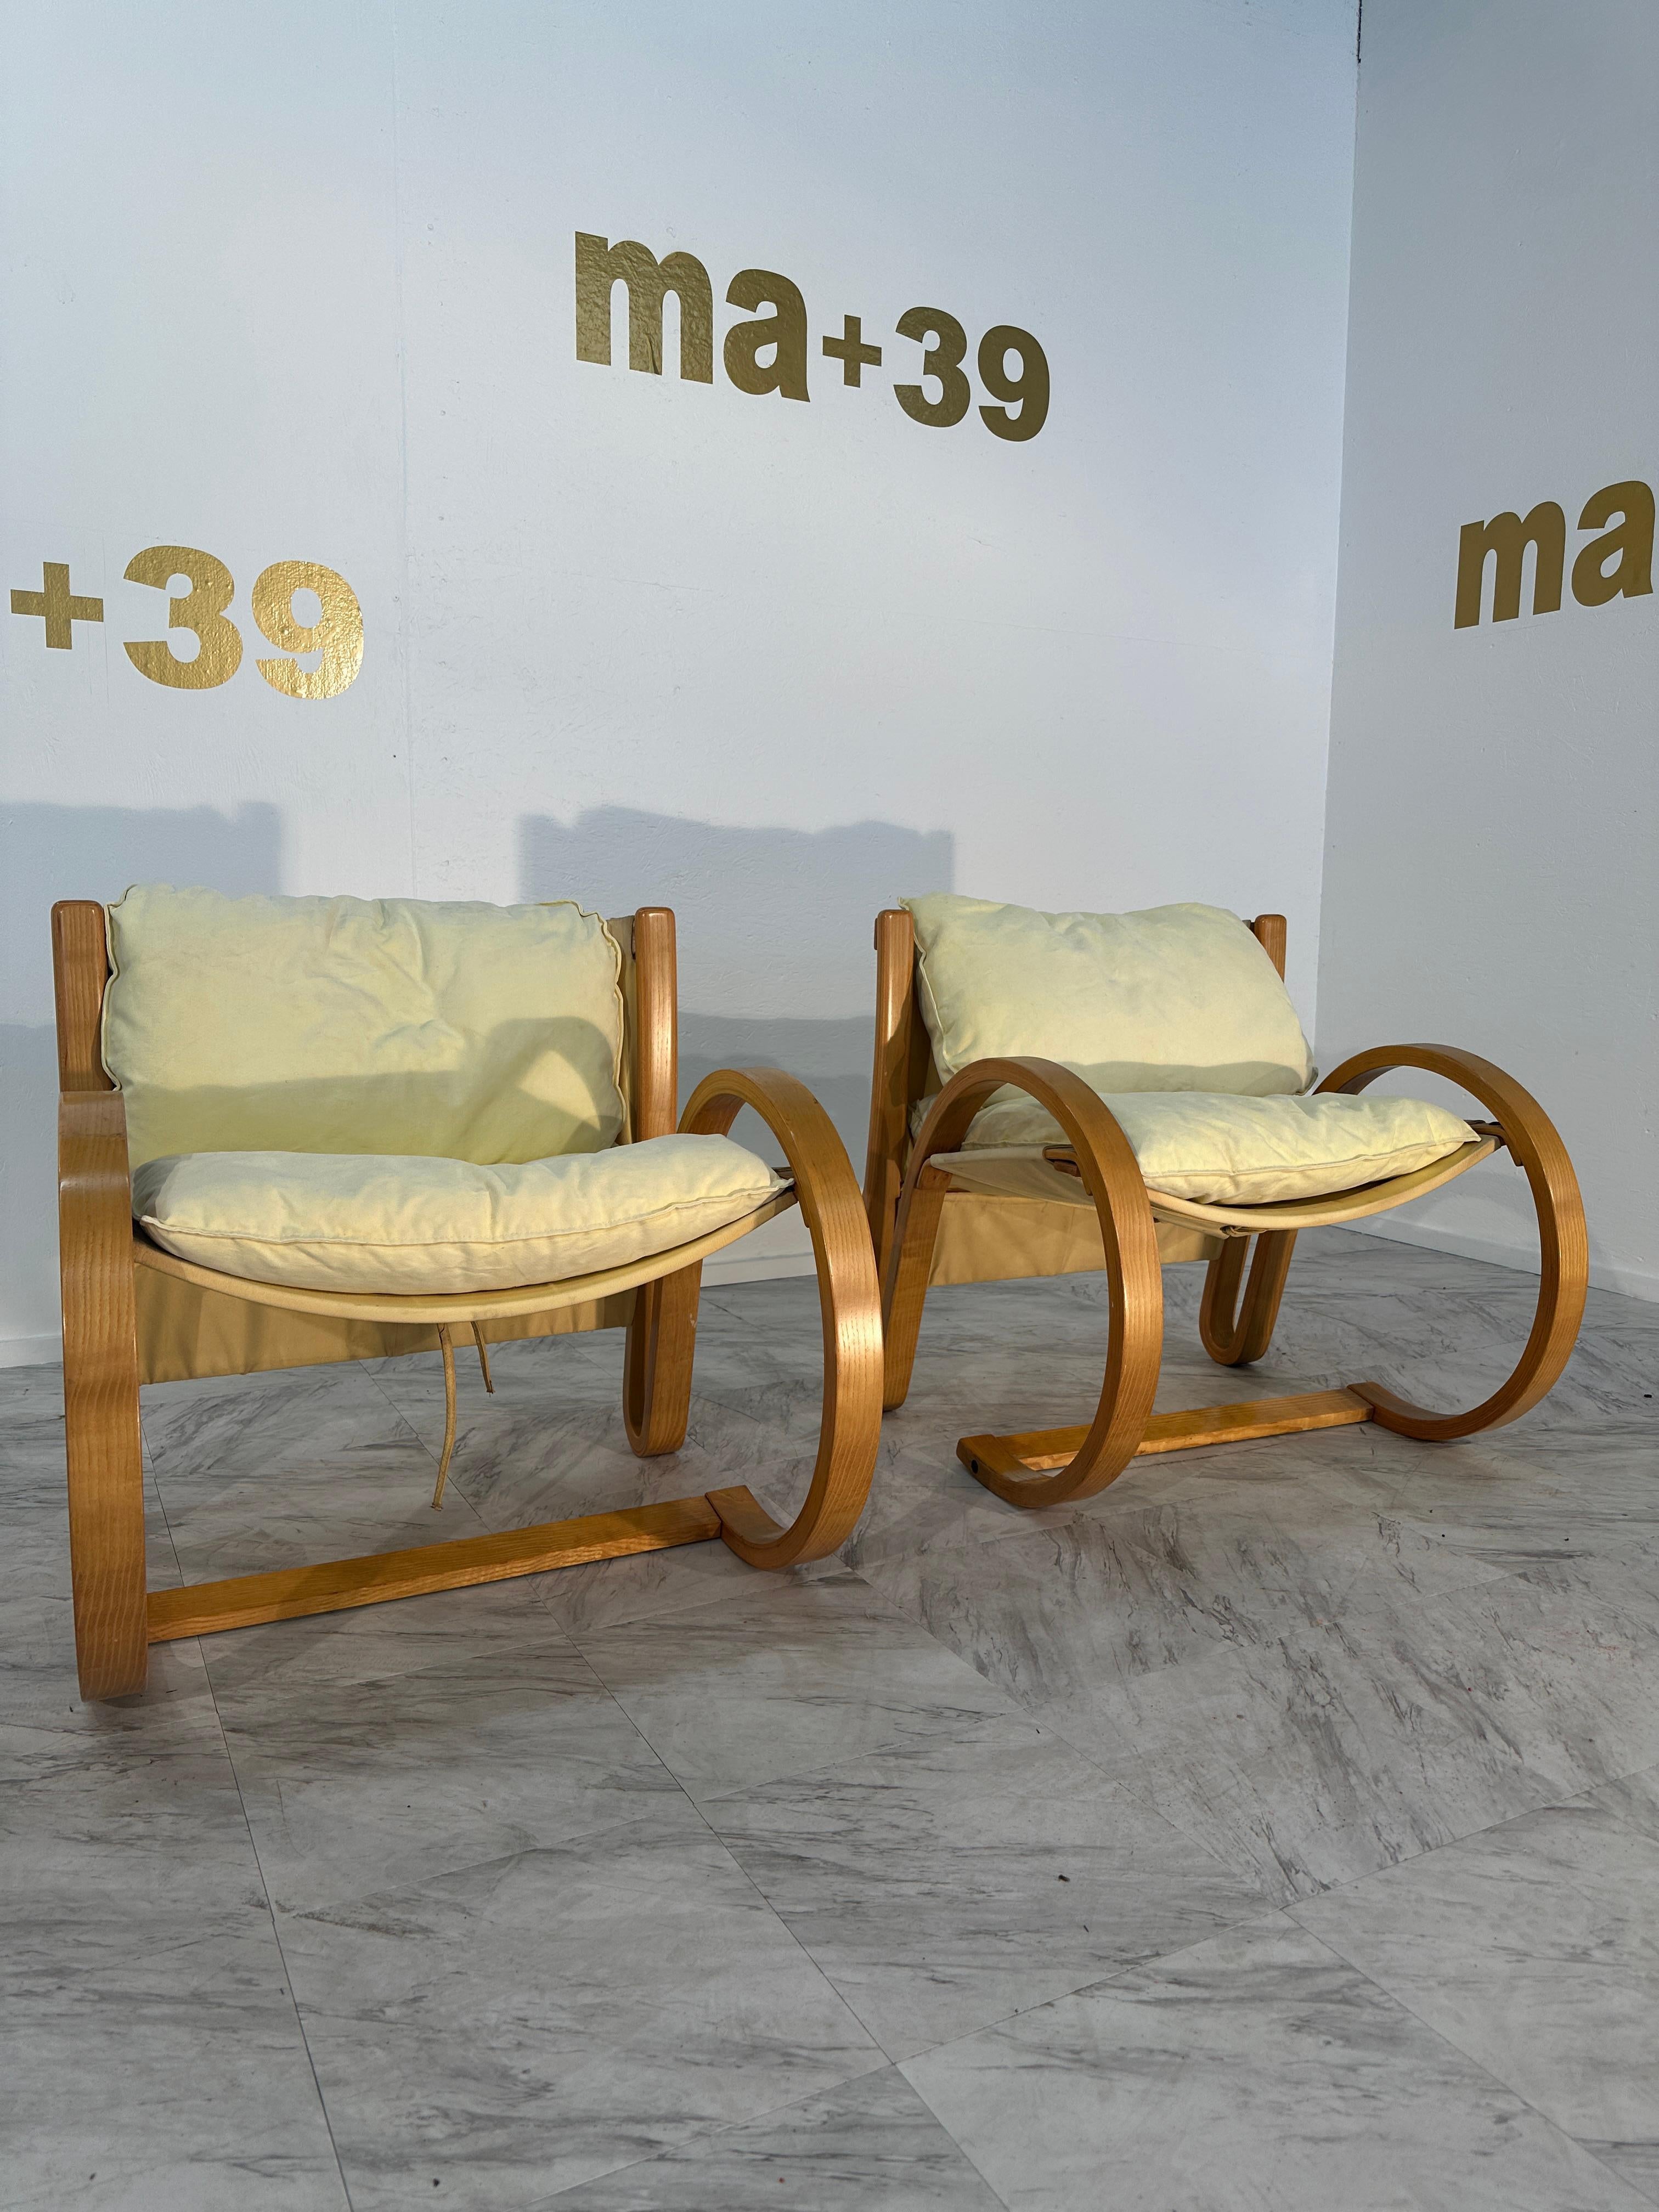 Certainly! The Pair of 2 Mid Century Italian Alvar Aalto Lounge Chairs from the 1980s are exquisitely crafted with a handmade curved wood base, reflecting the iconic mid-century design aesthetic. The chairs feature a sleek and stylish appearance,